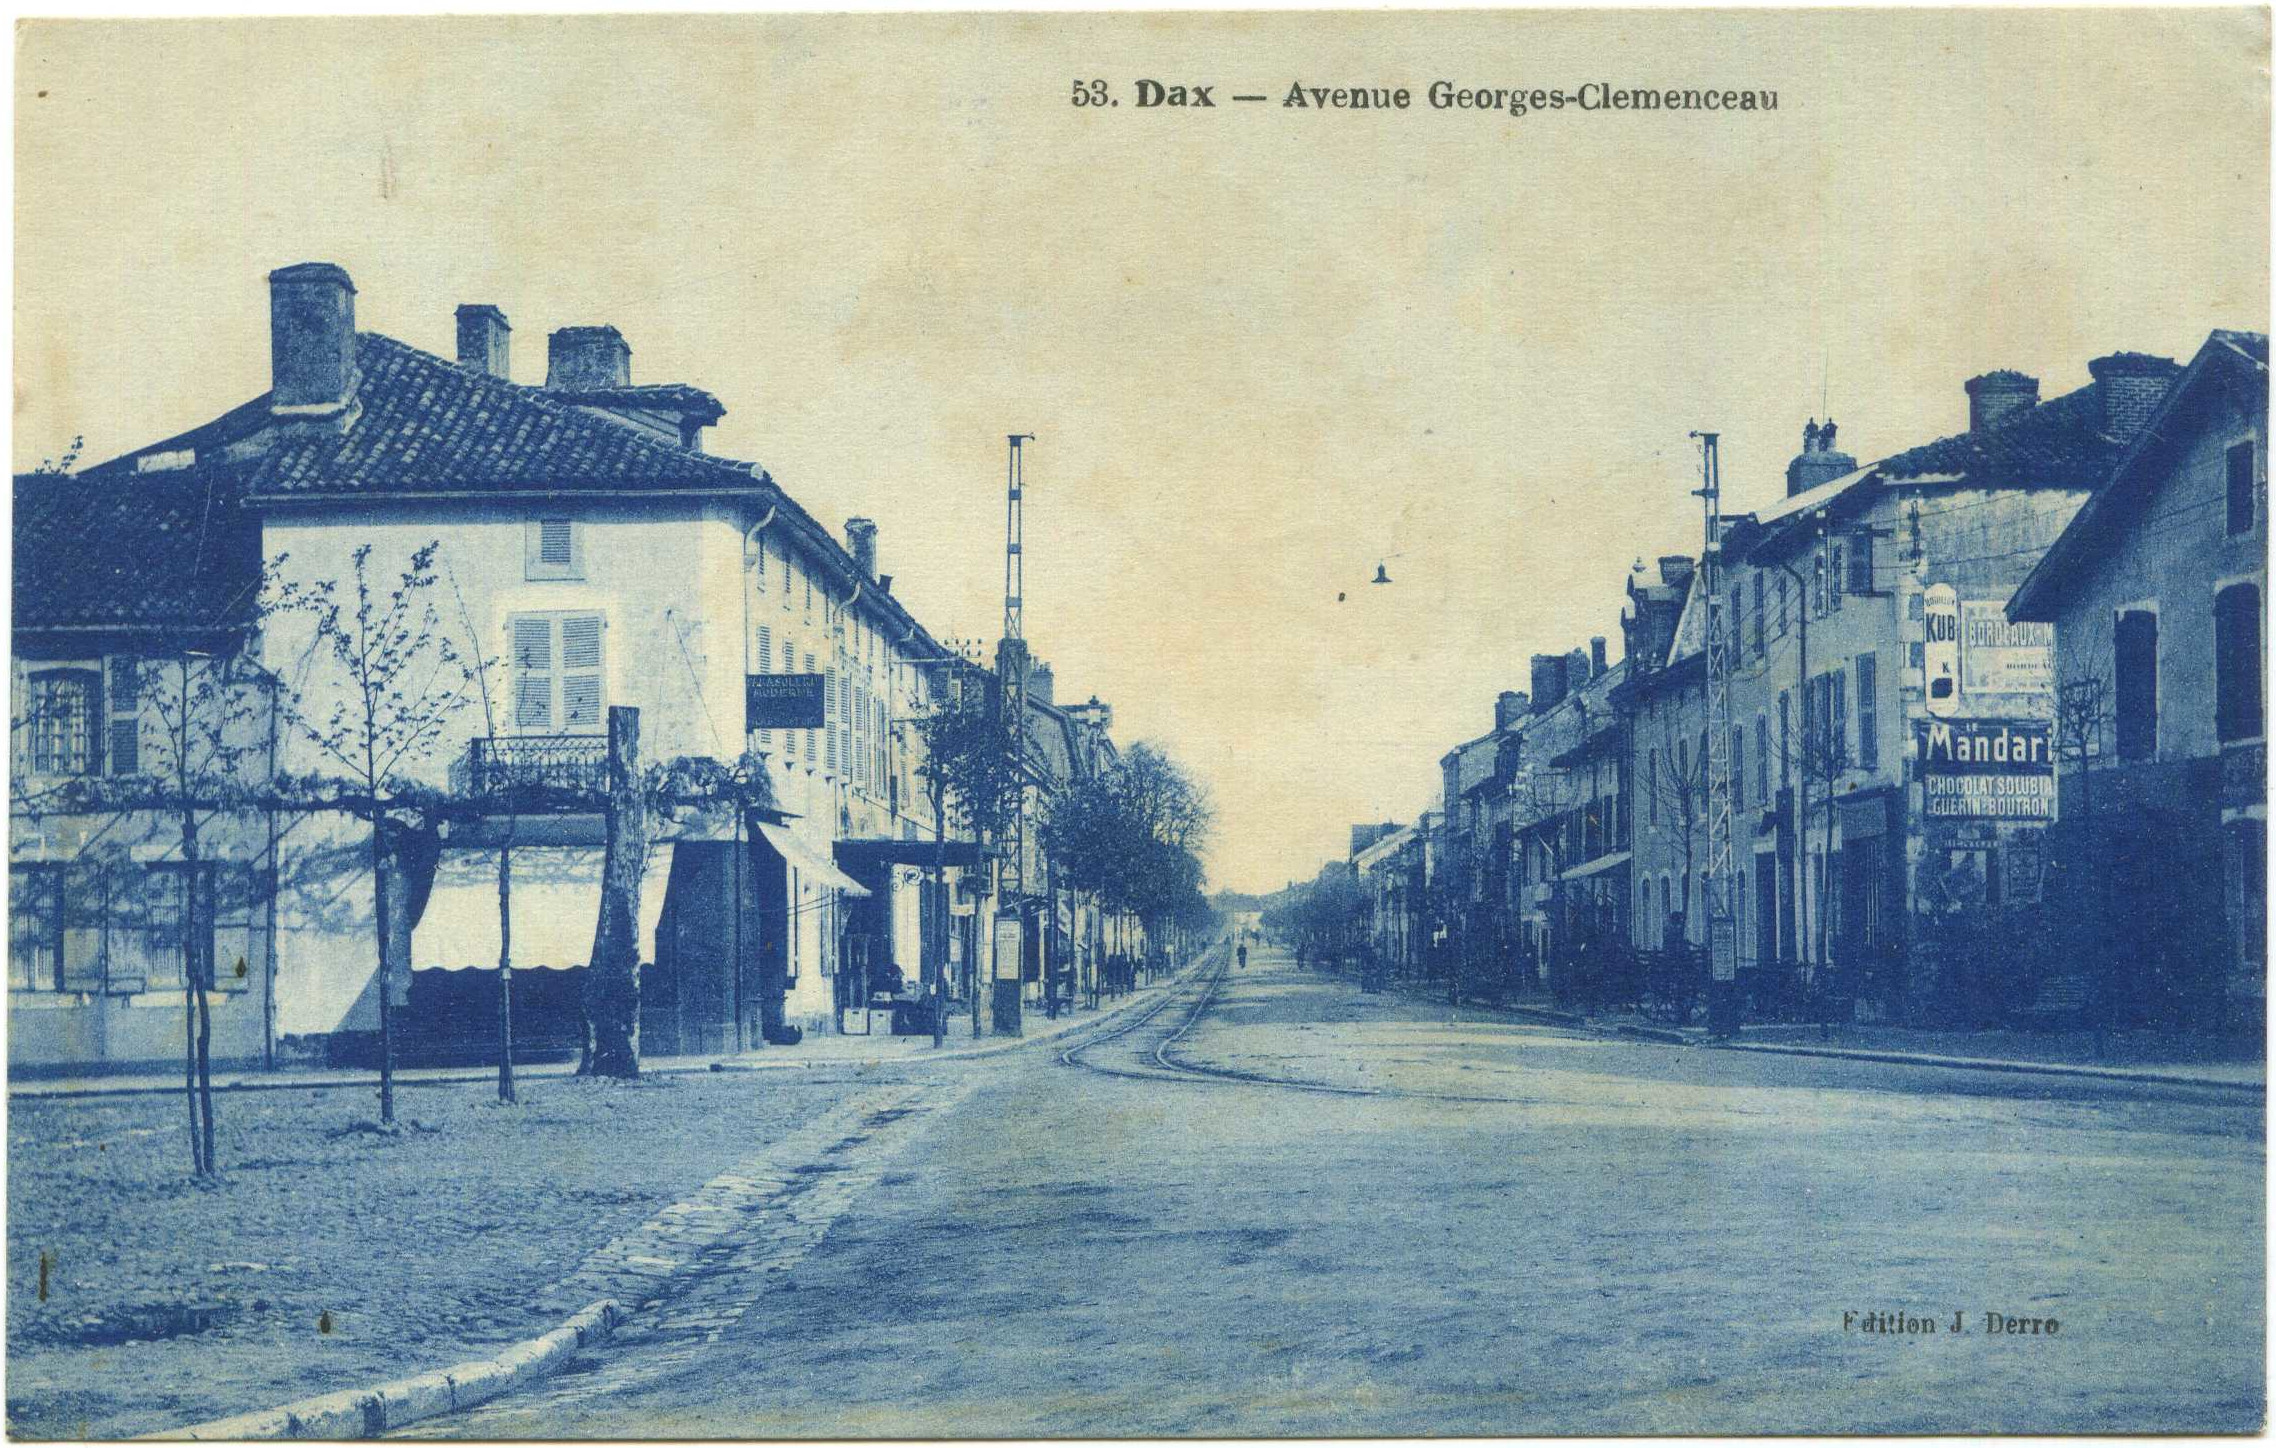 Dax - Avenue Georges-Clemenceau